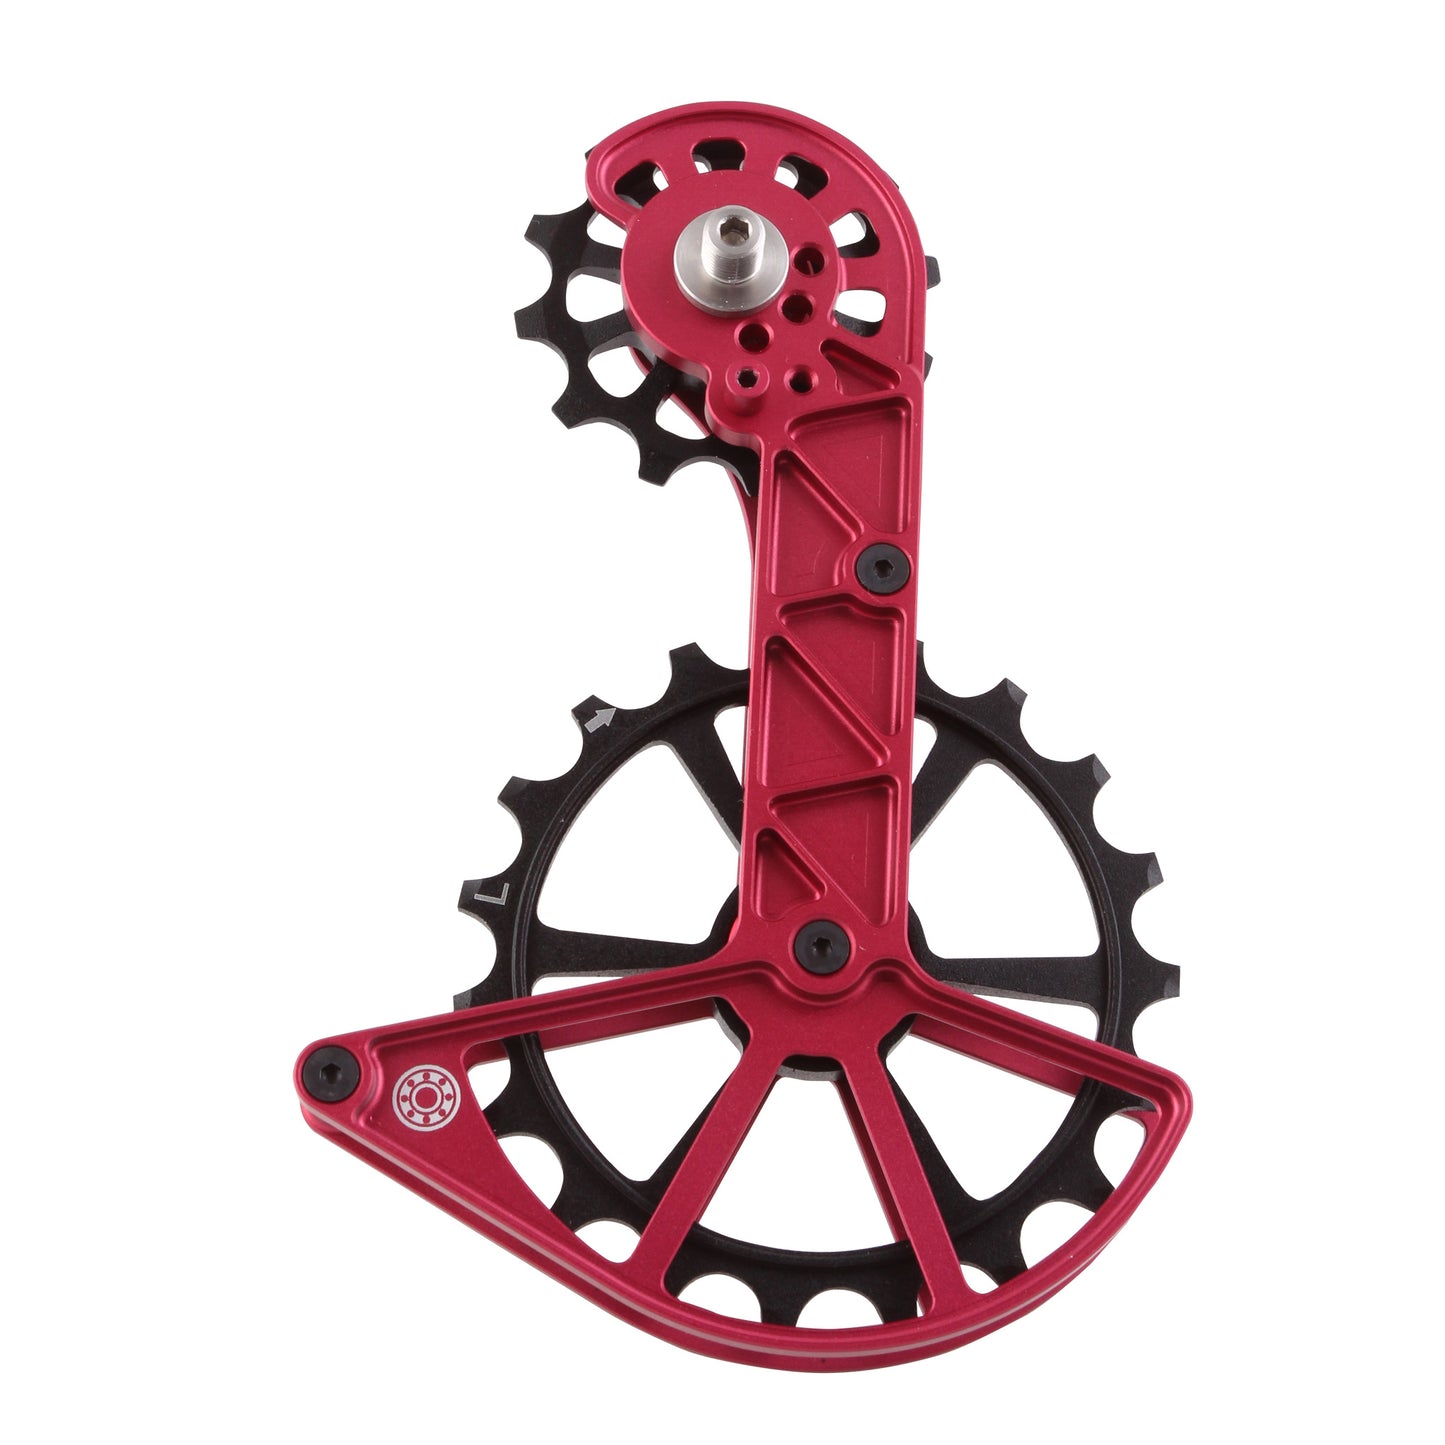 Kolossos Oversized Pulley Cage, Shim RX800 - Red